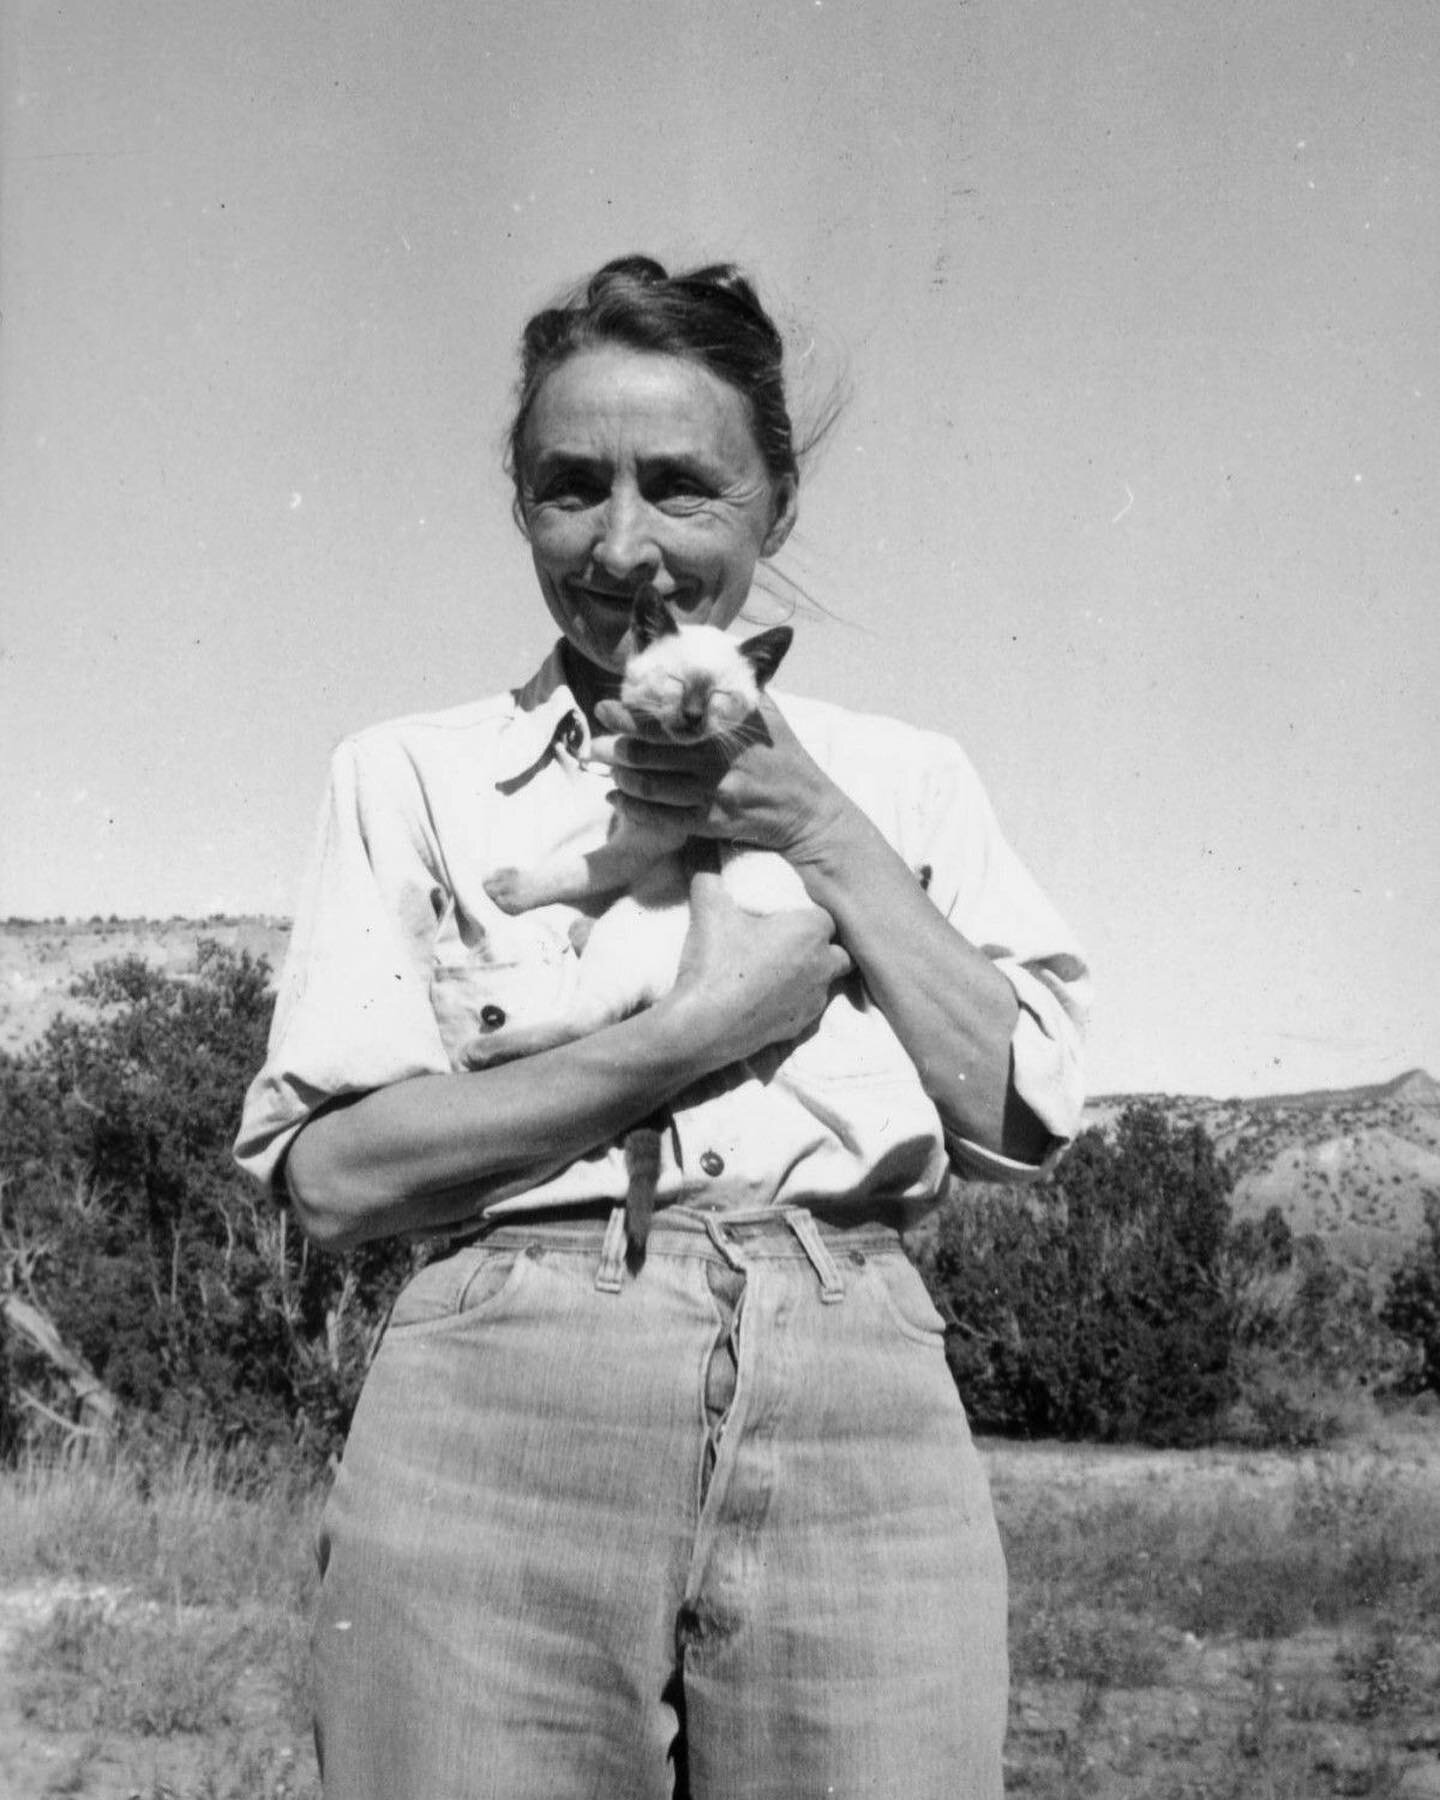 The artist Georgia O&rsquo;Keeffe and her cat

#georgiaokeeffe #artist #catsofinstagram #mood